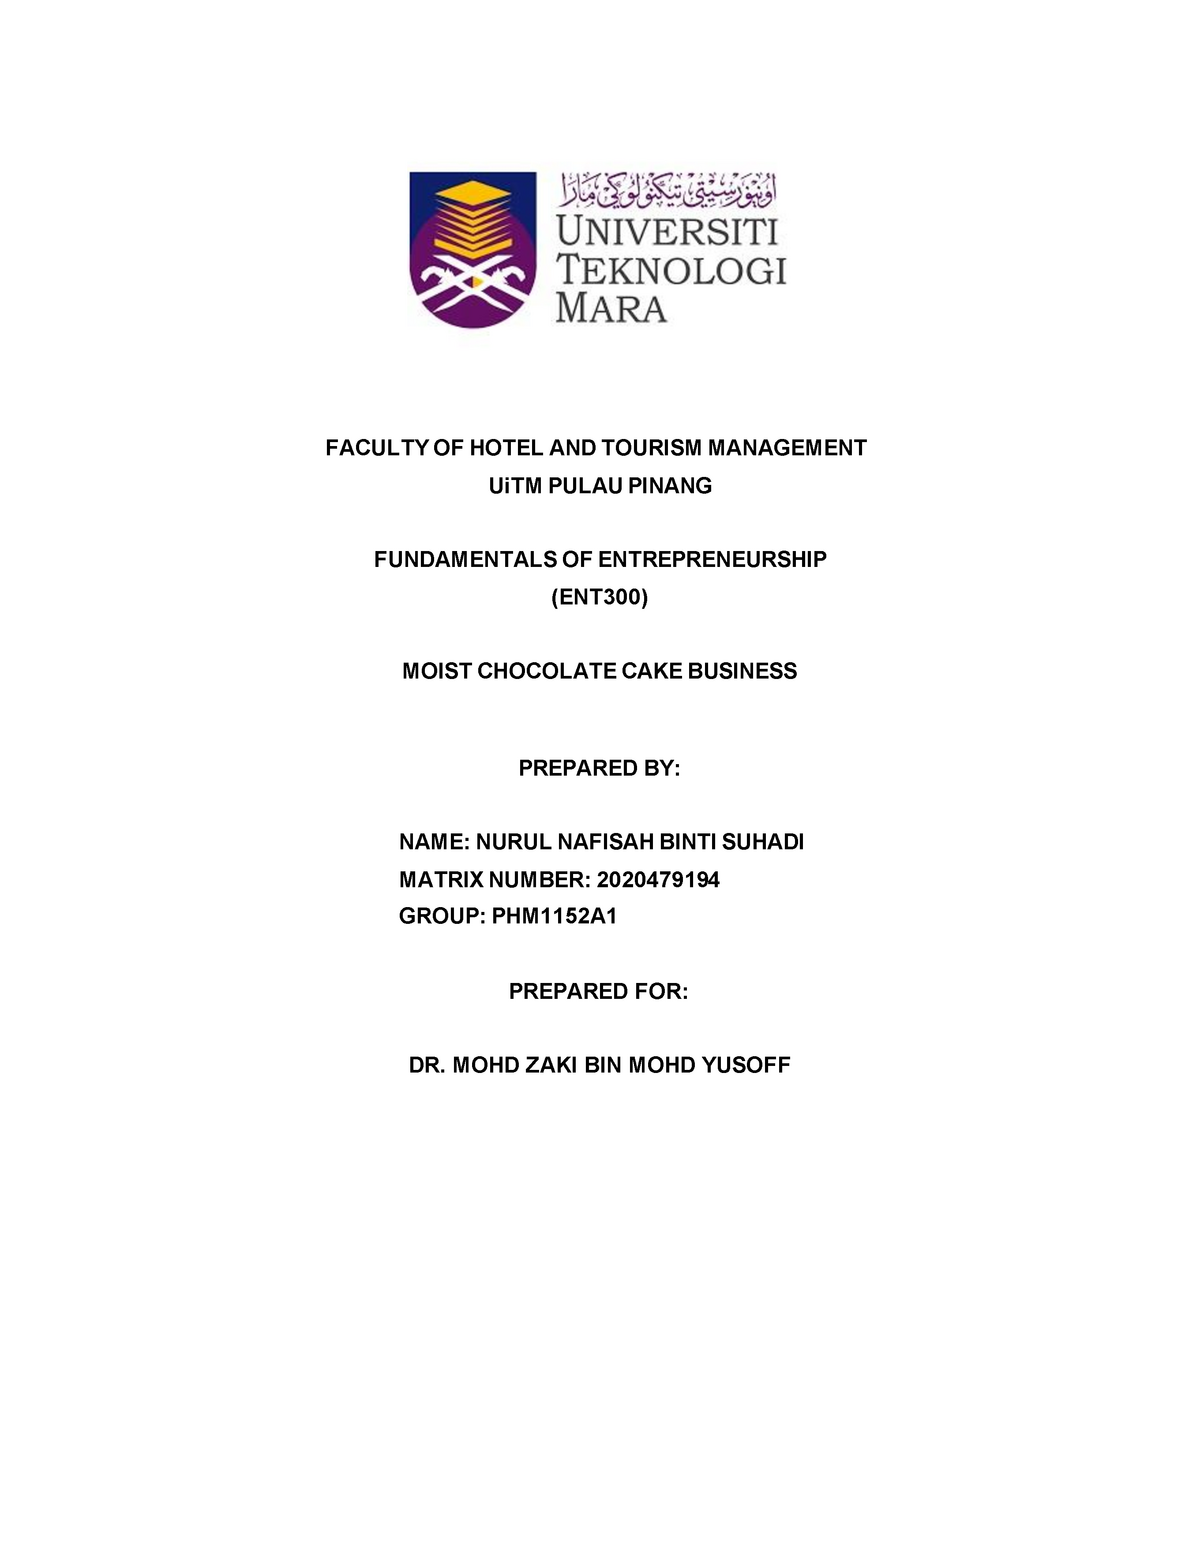 ent300 individual assignment uitm